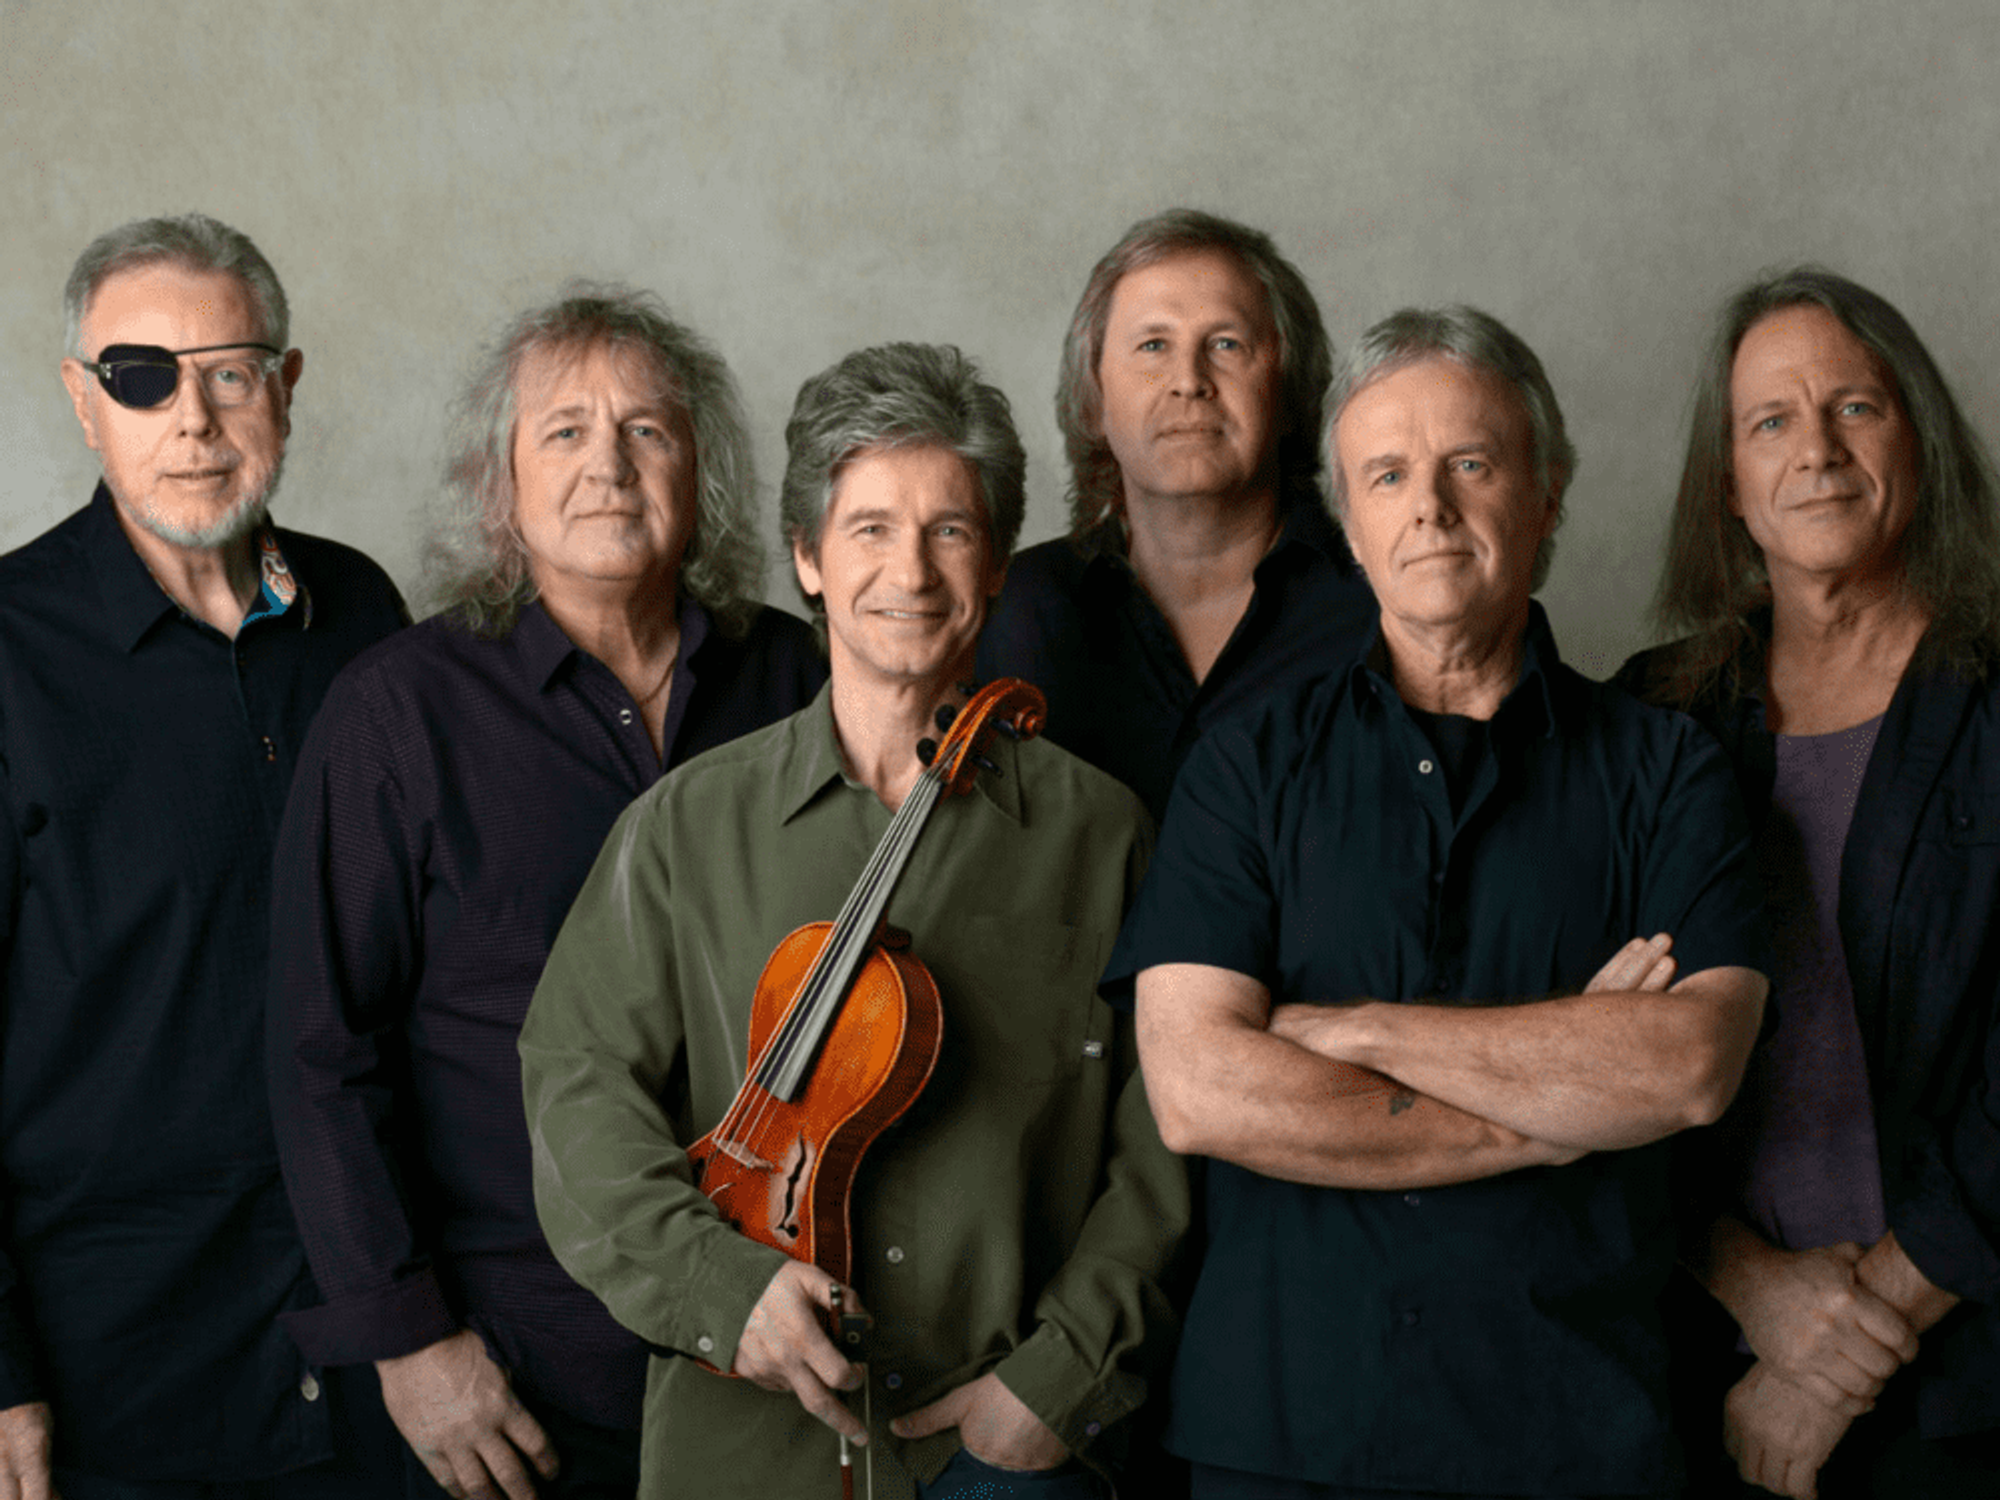 American rock legends Kansas play the Tobin Center for the Performing Arts on Friday.